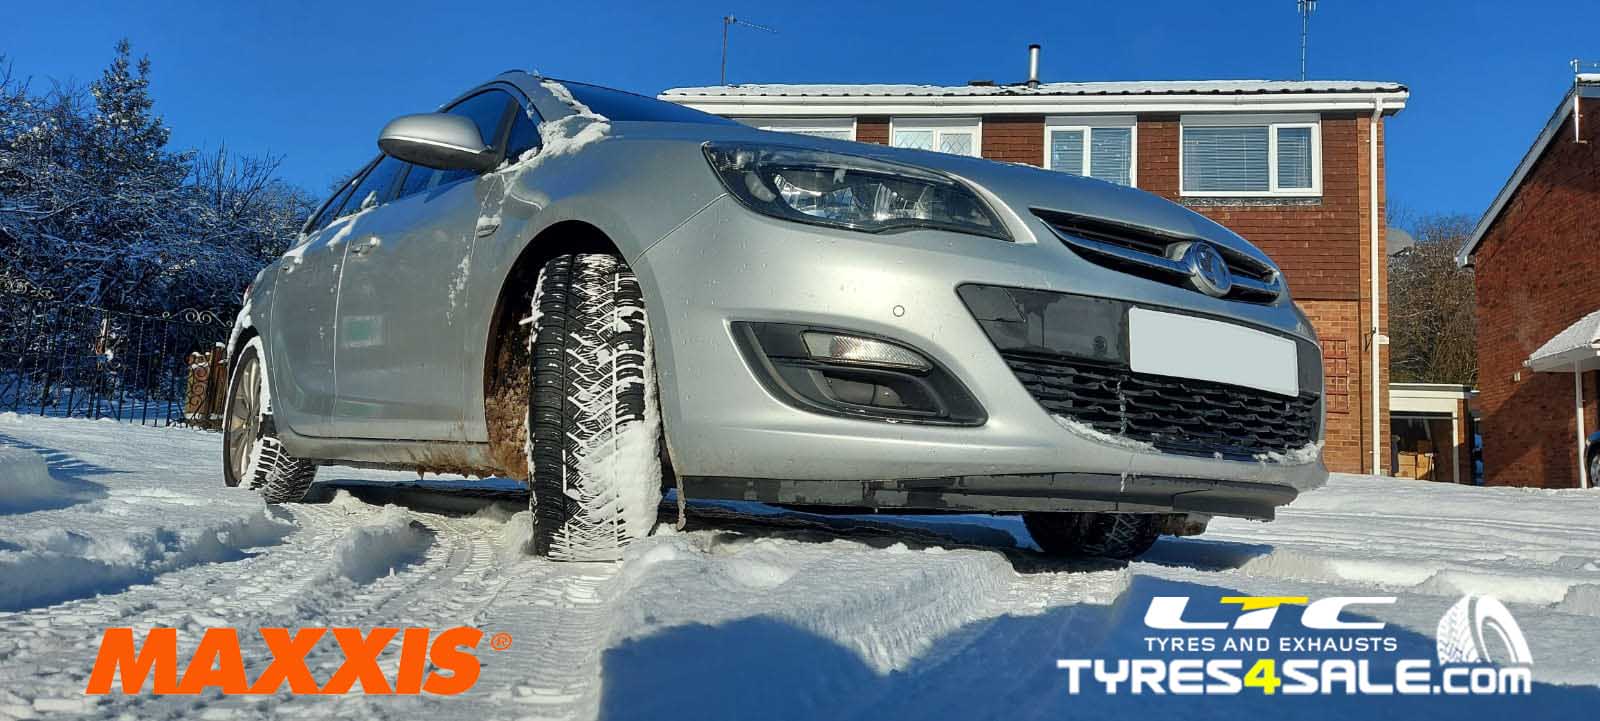 Maxxis AP3 All Season Tyres FREE Winter Pack Offer (7)